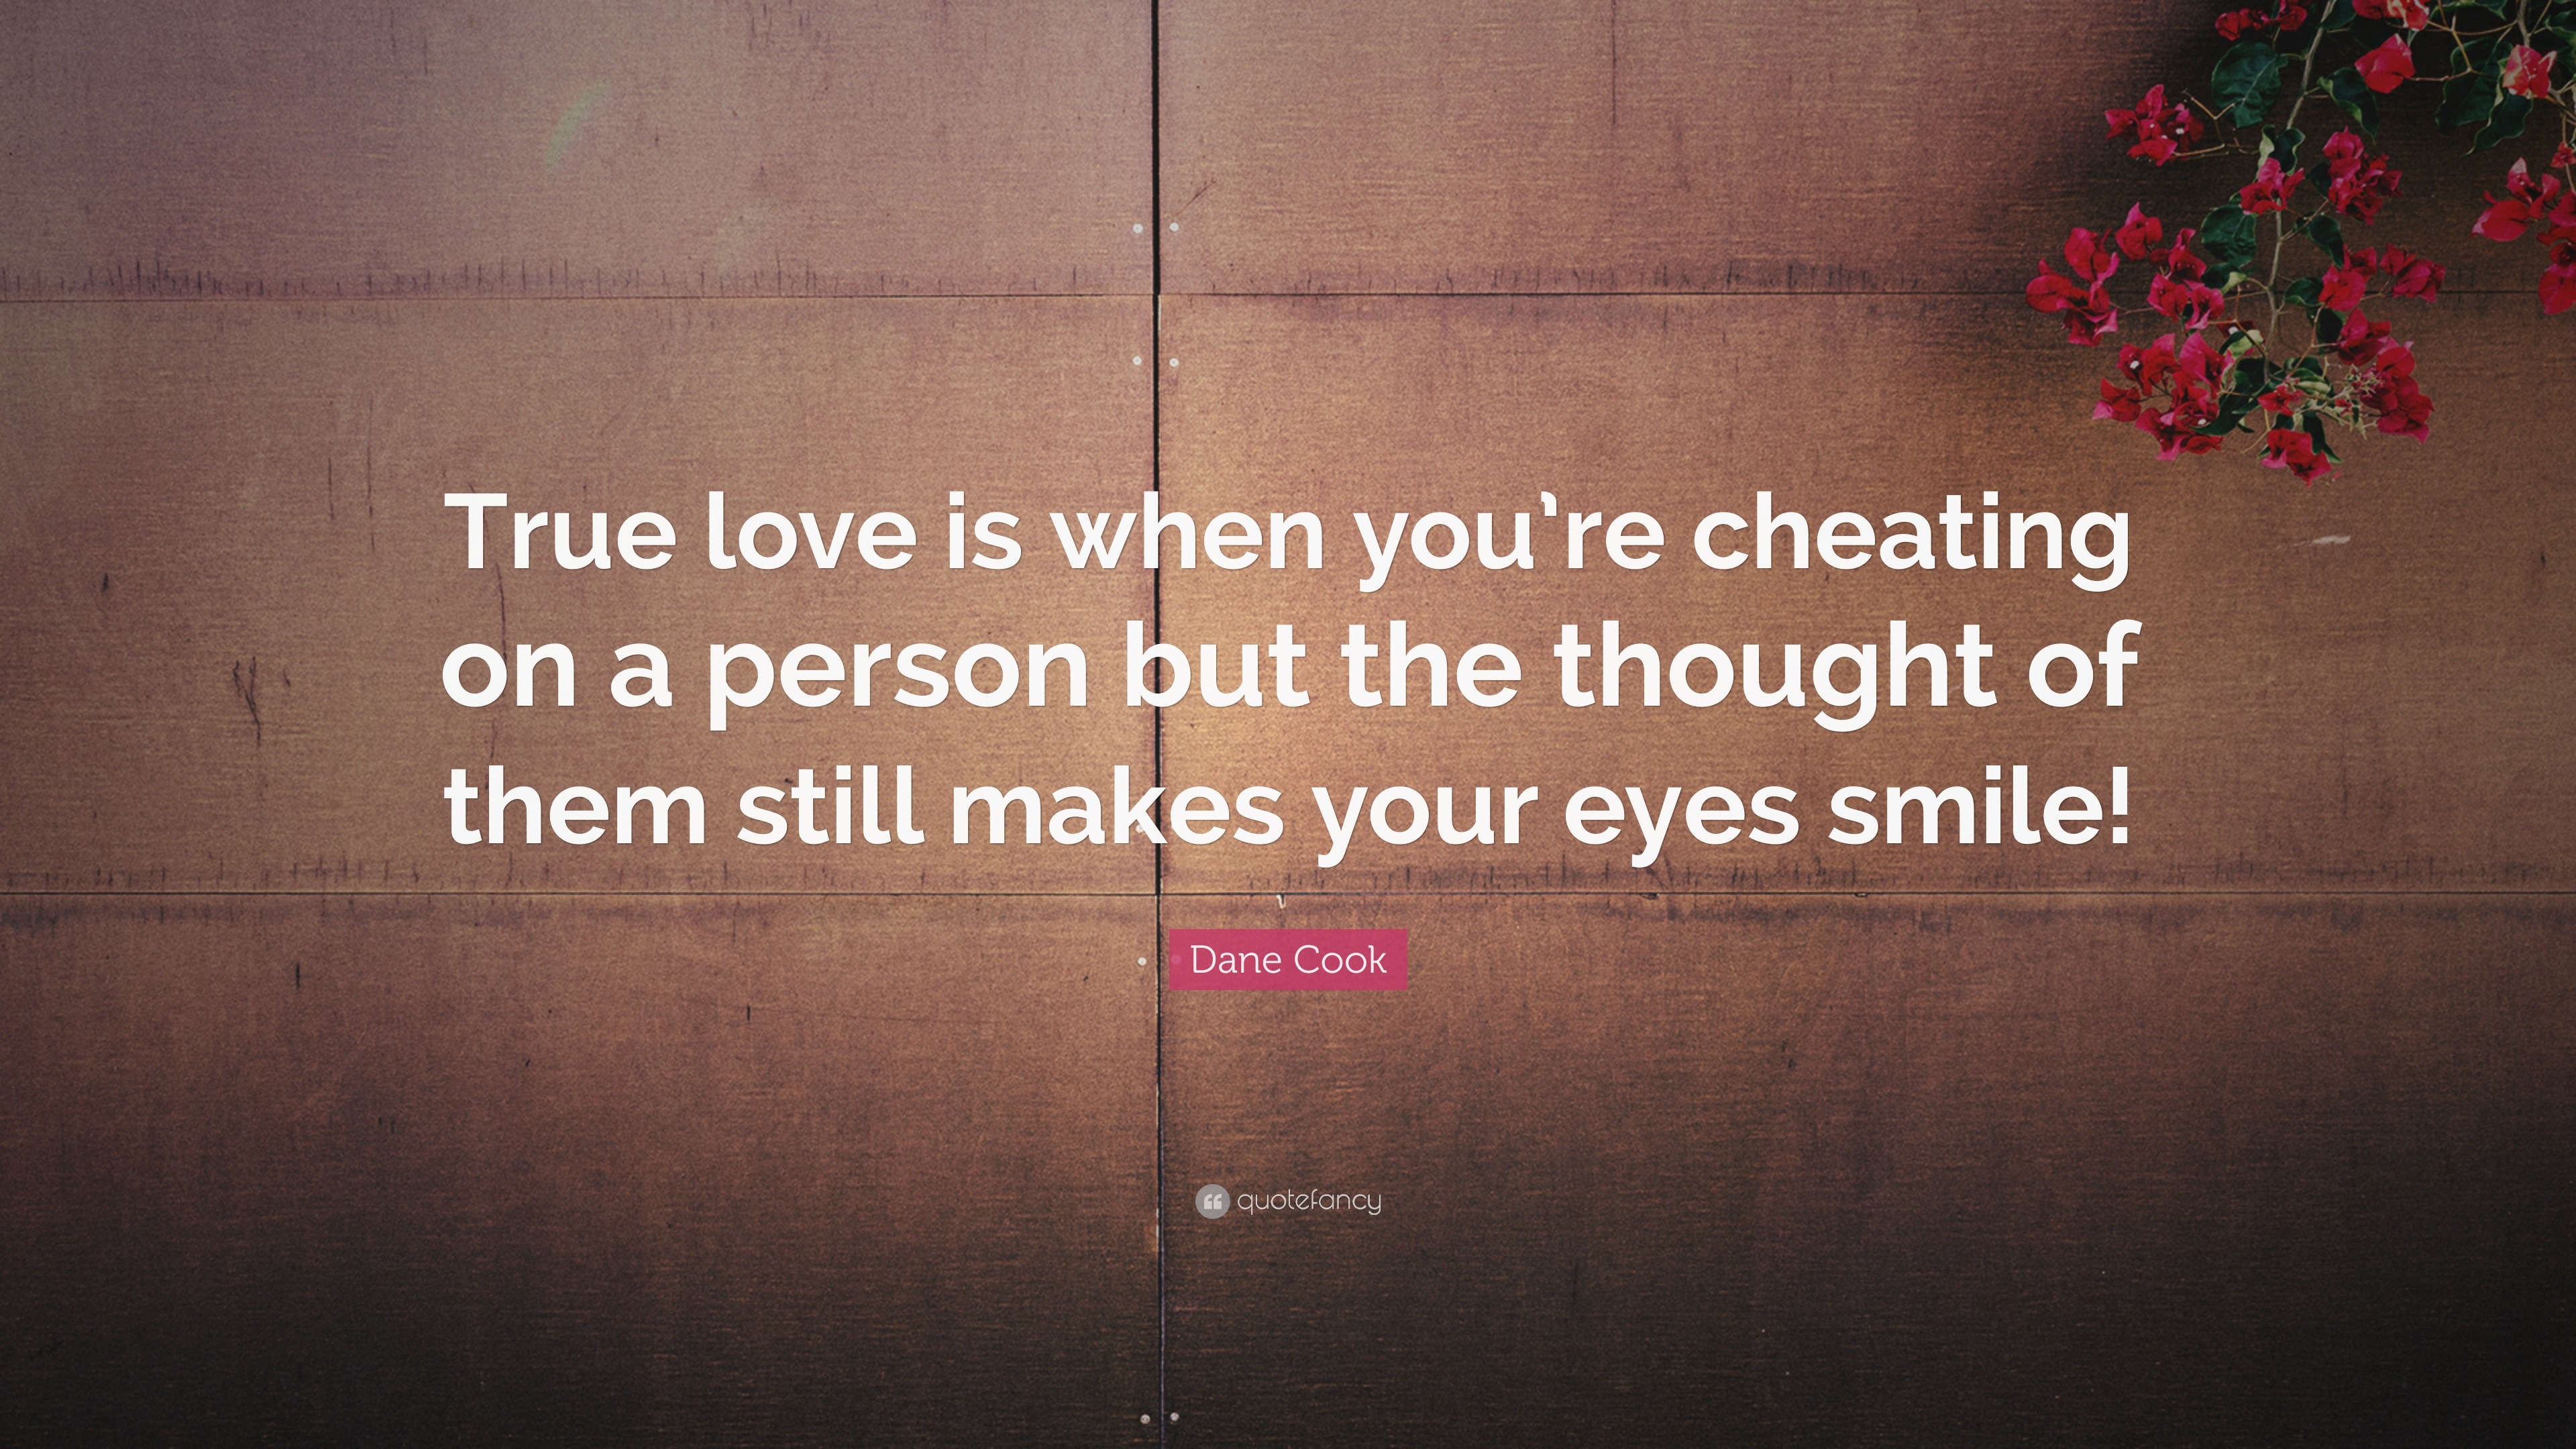 Dane Cook Quote “True love is when you re cheating on a person